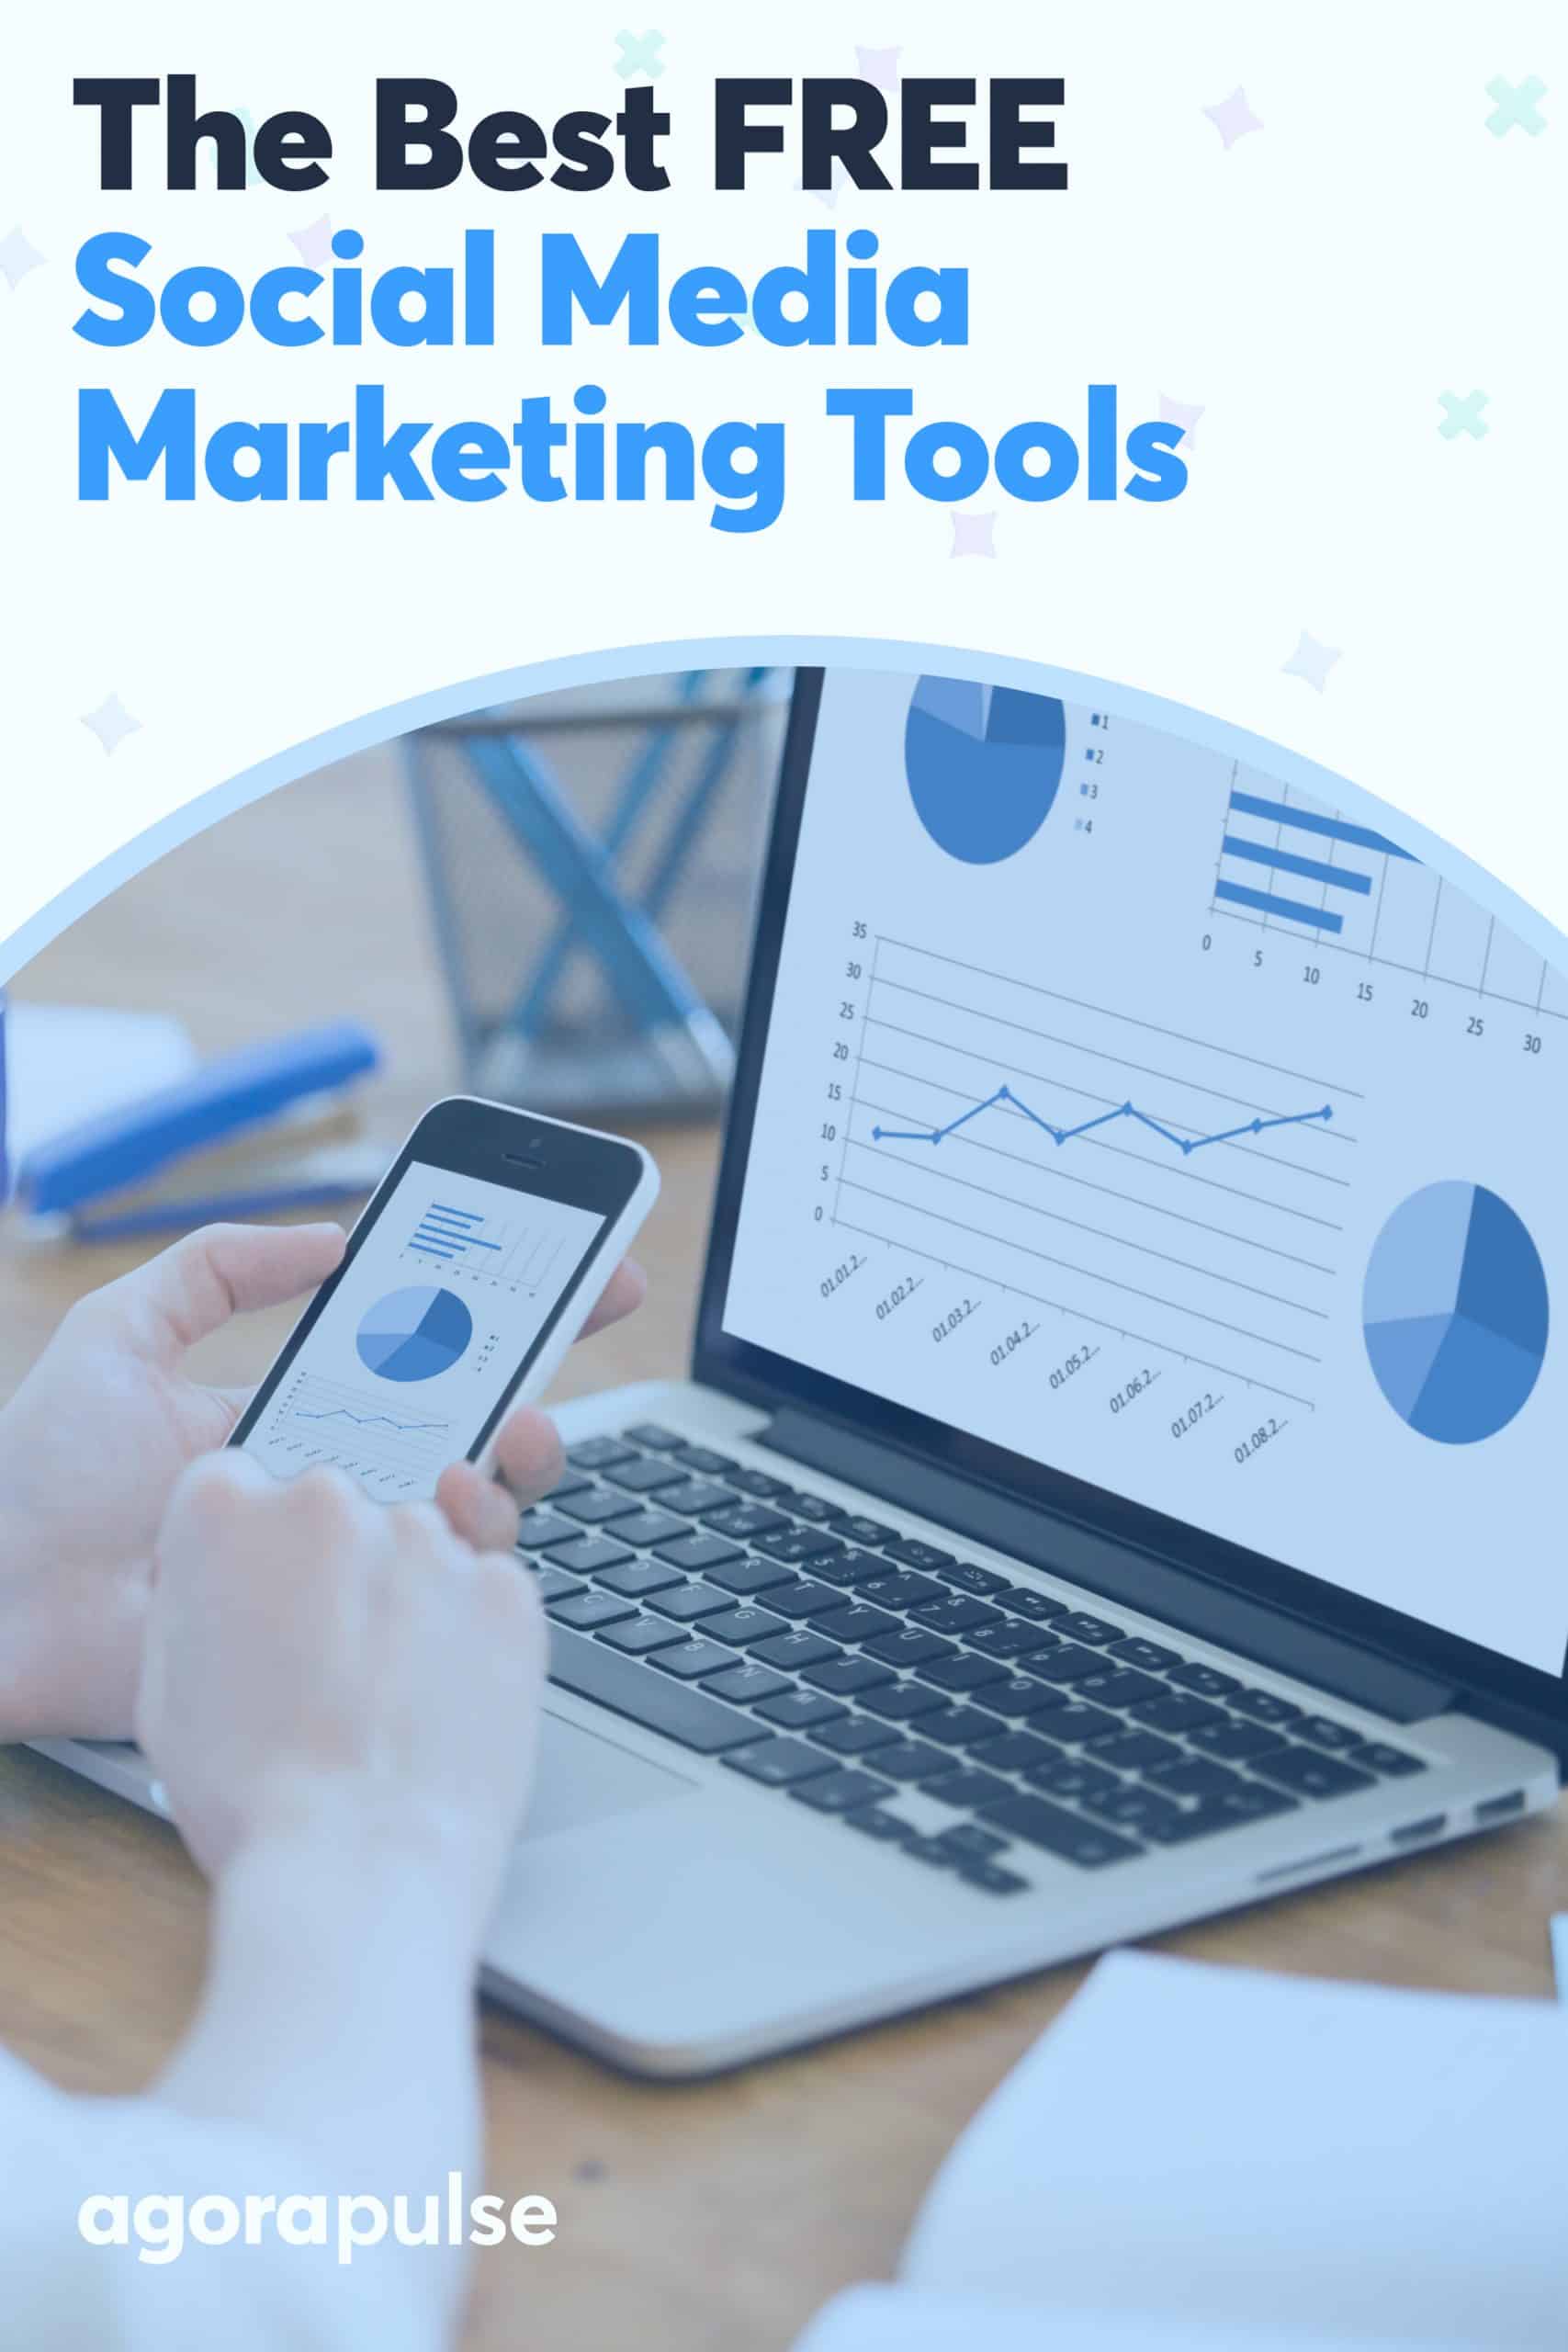 20 Free Social Media Marketing Tools You Should Try